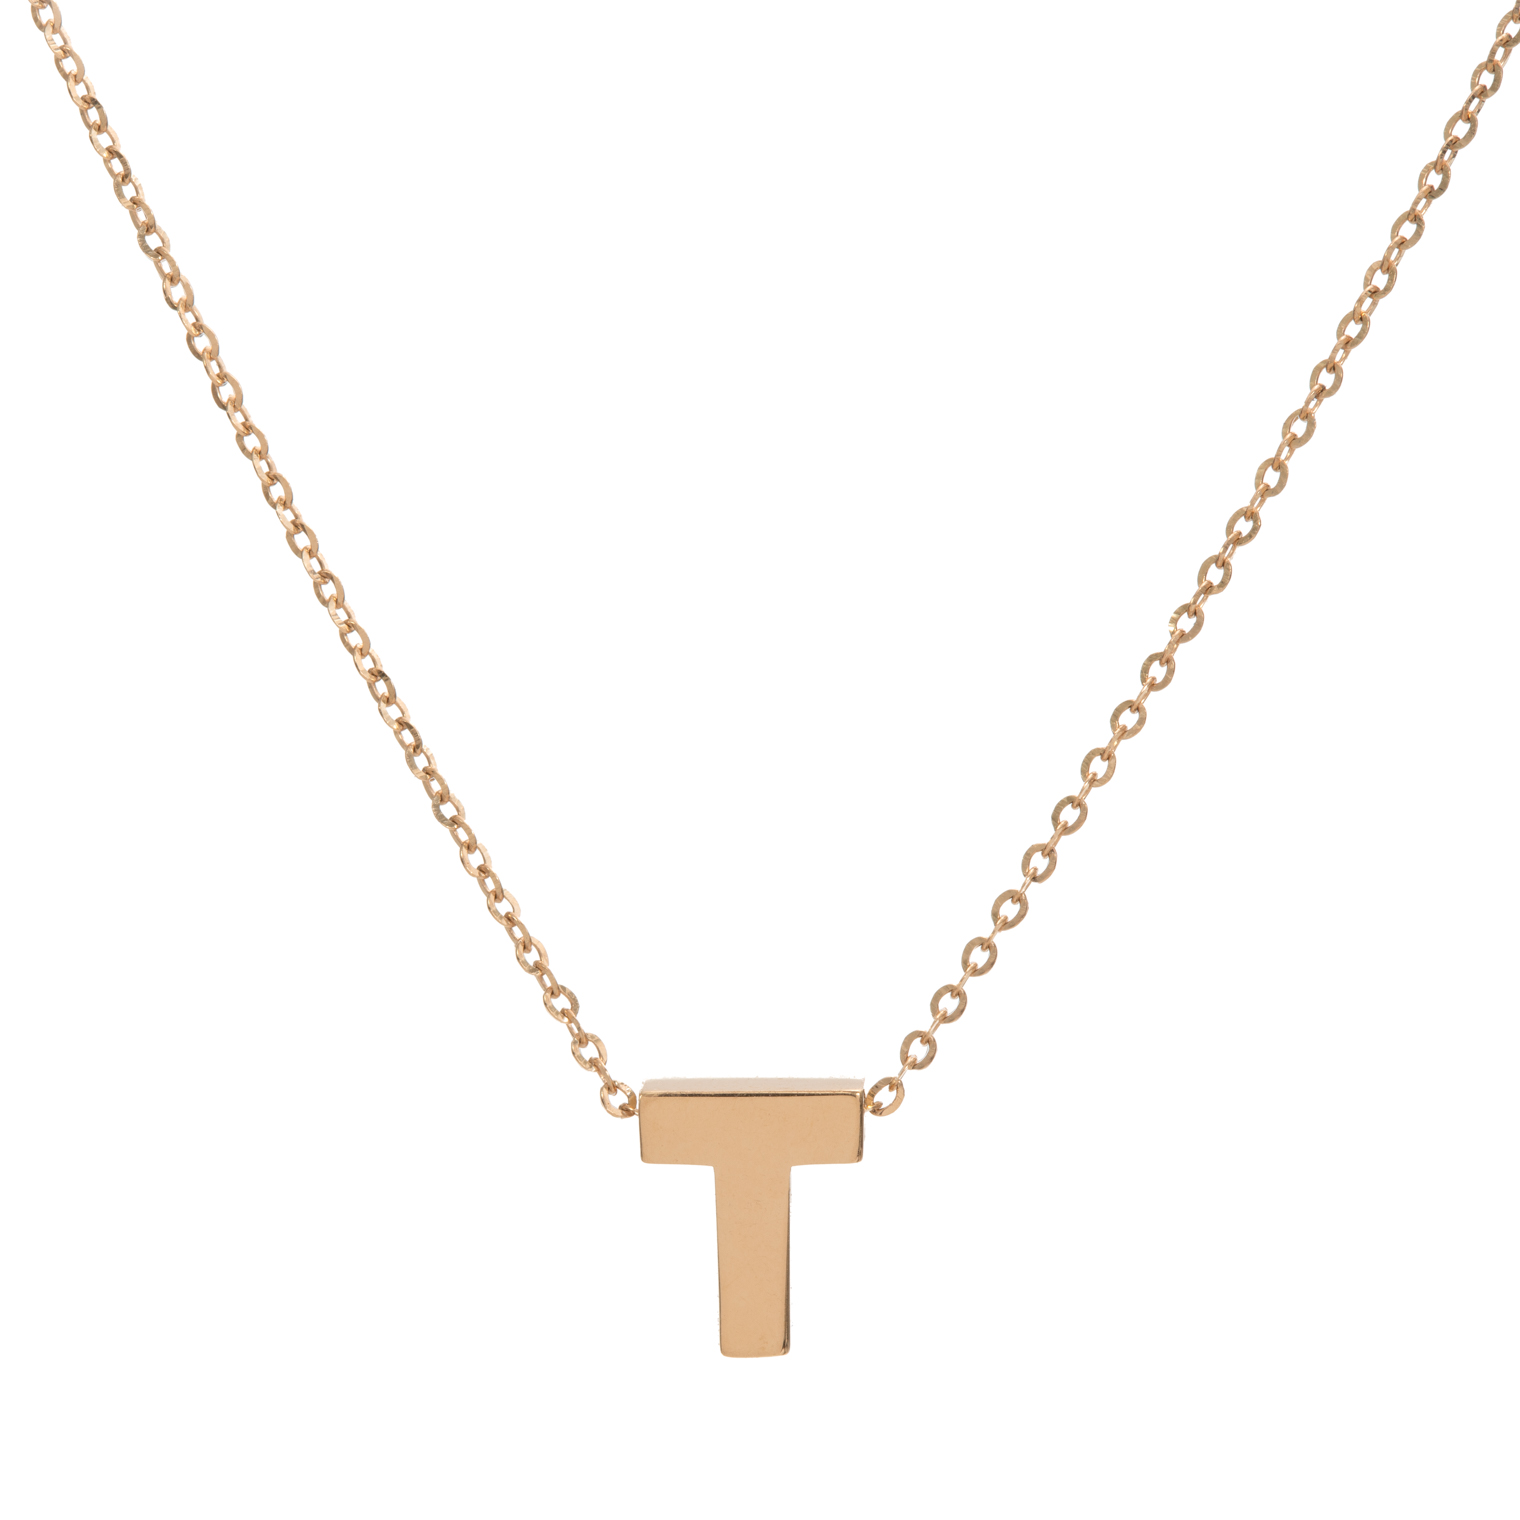 Initial Personalized Pendant Gemhub Custom Tilted Diamond Block Letter Initial Necklace 14k Yellow Gold